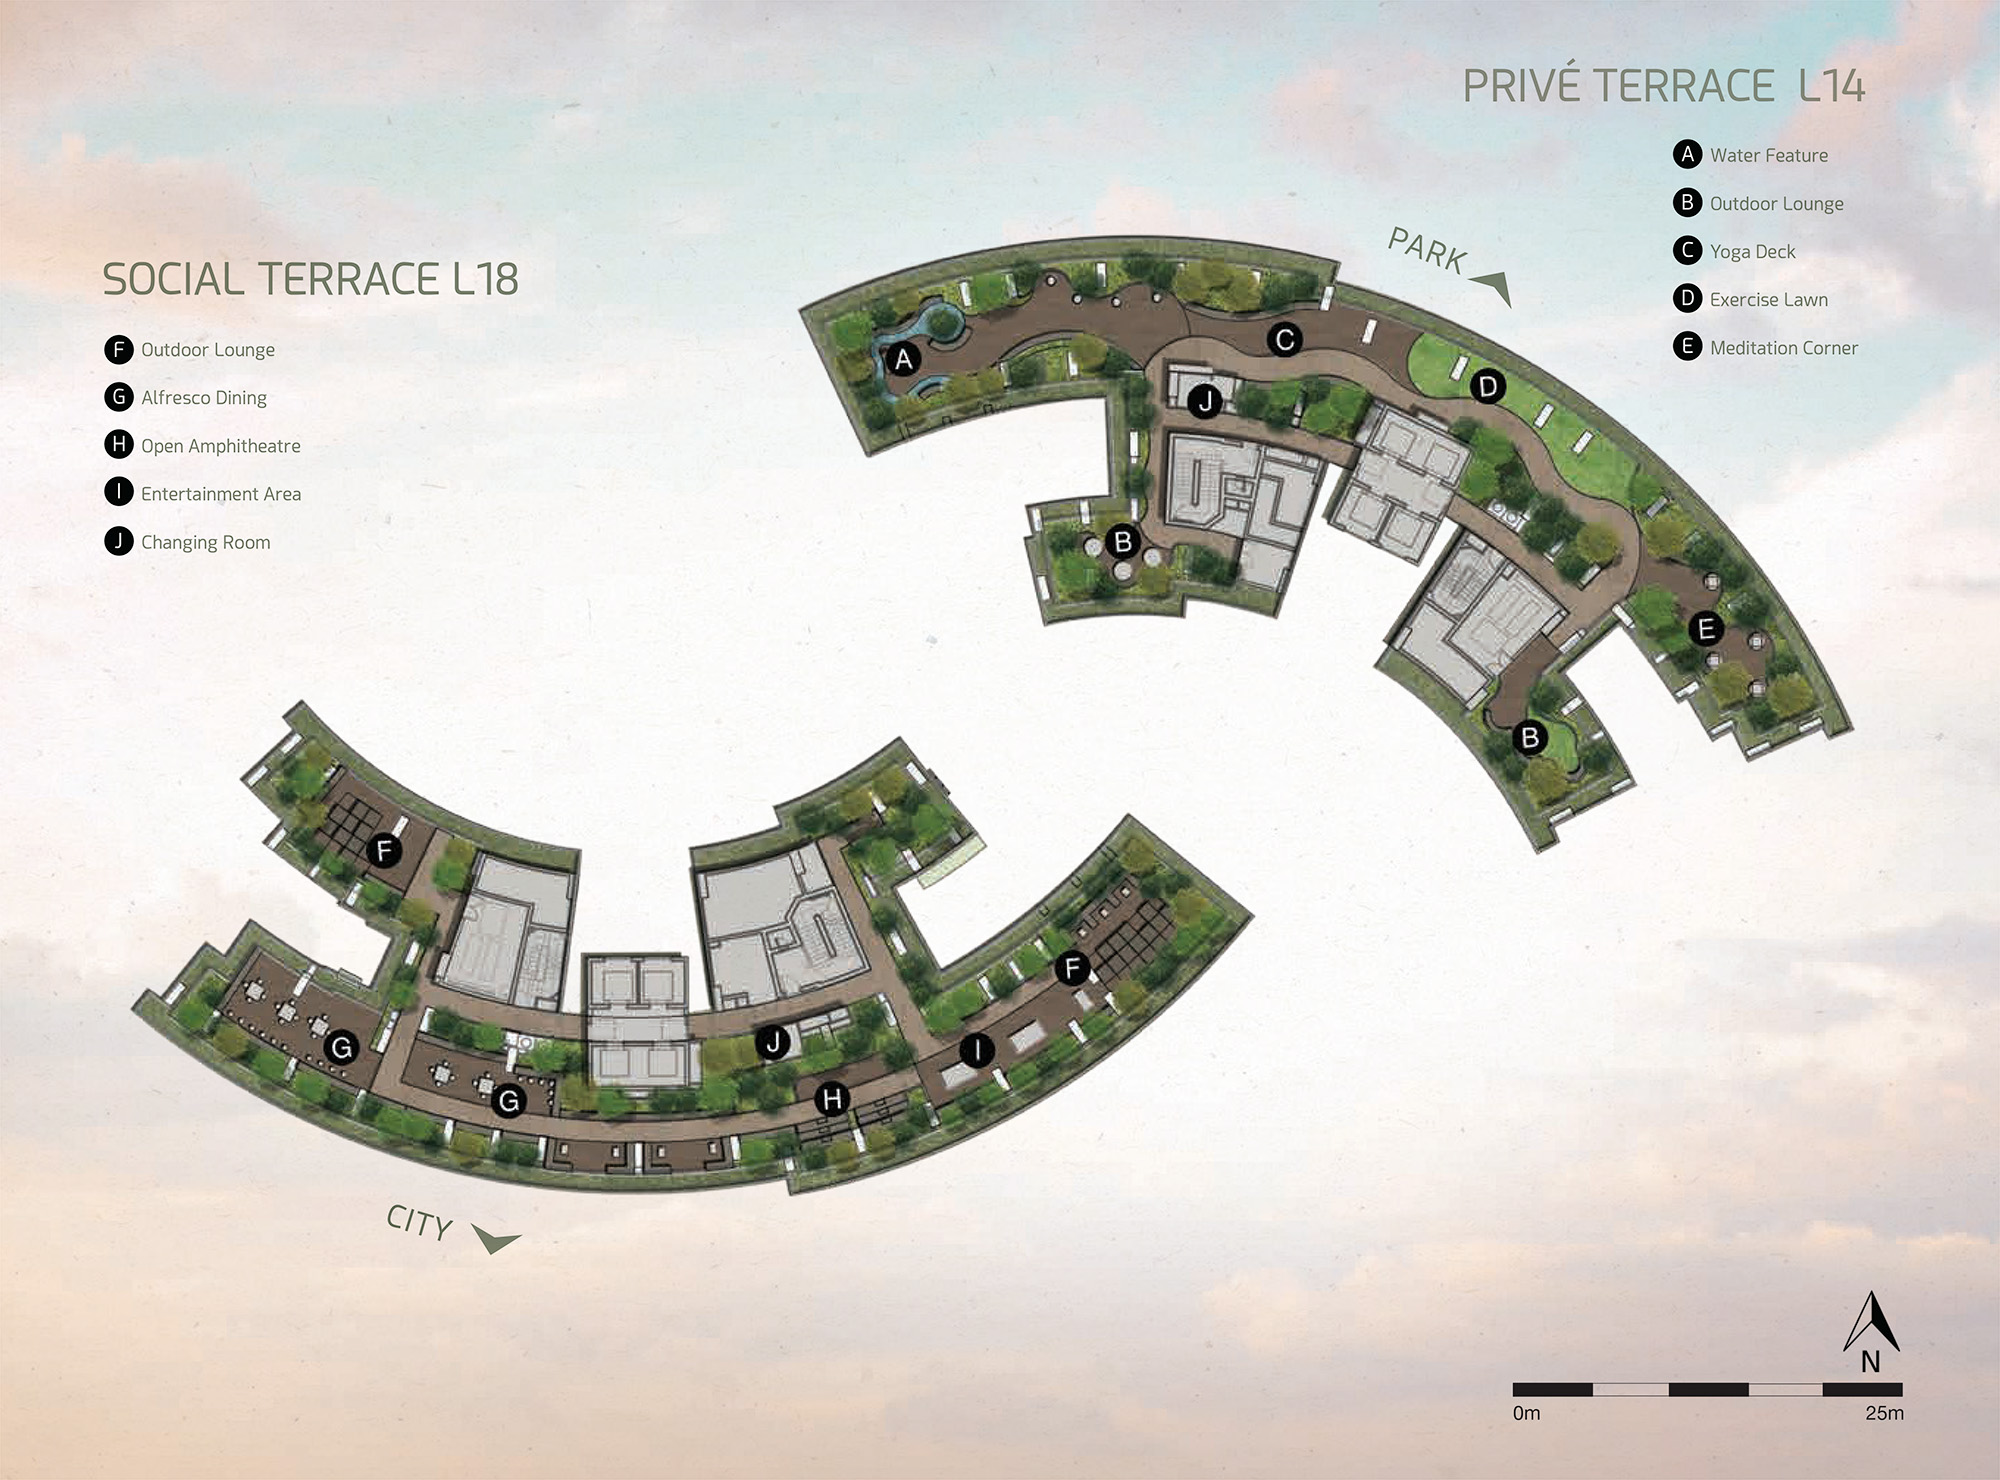 new-condo-singapore-one-pearl-bank-sky-terrace-site-plan